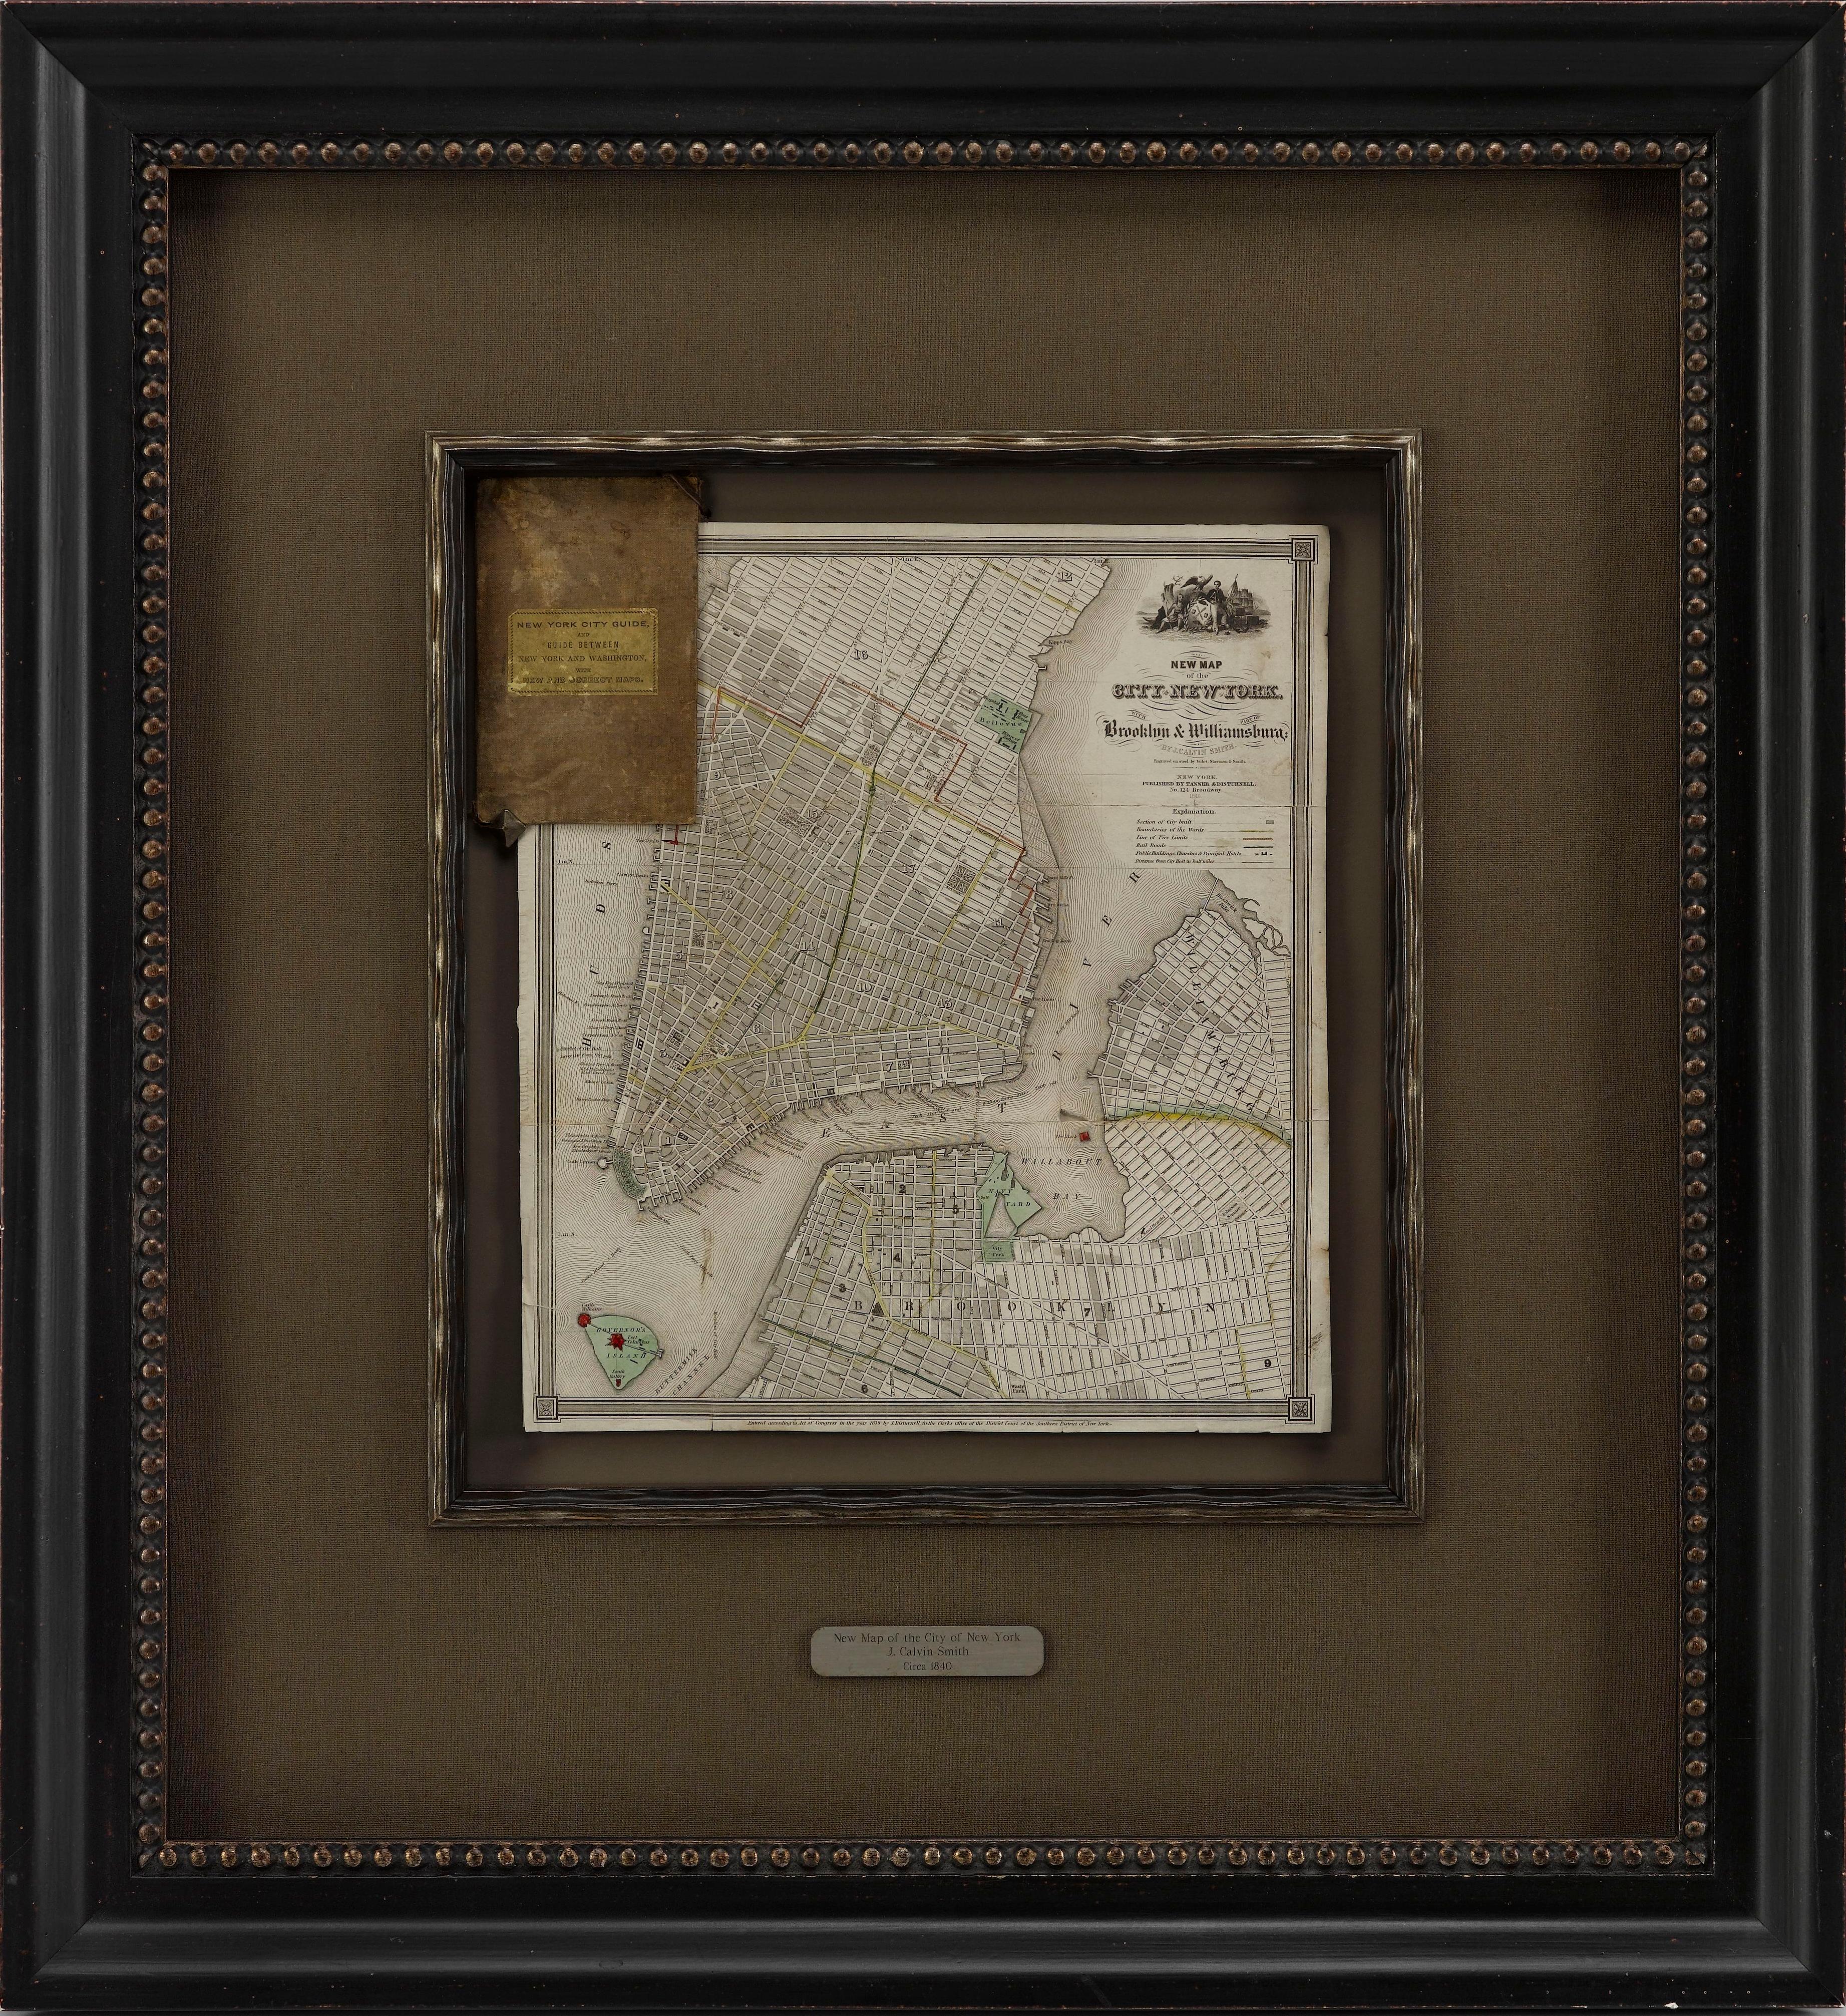 Presented is a hand-colored, engraved folding map titled 